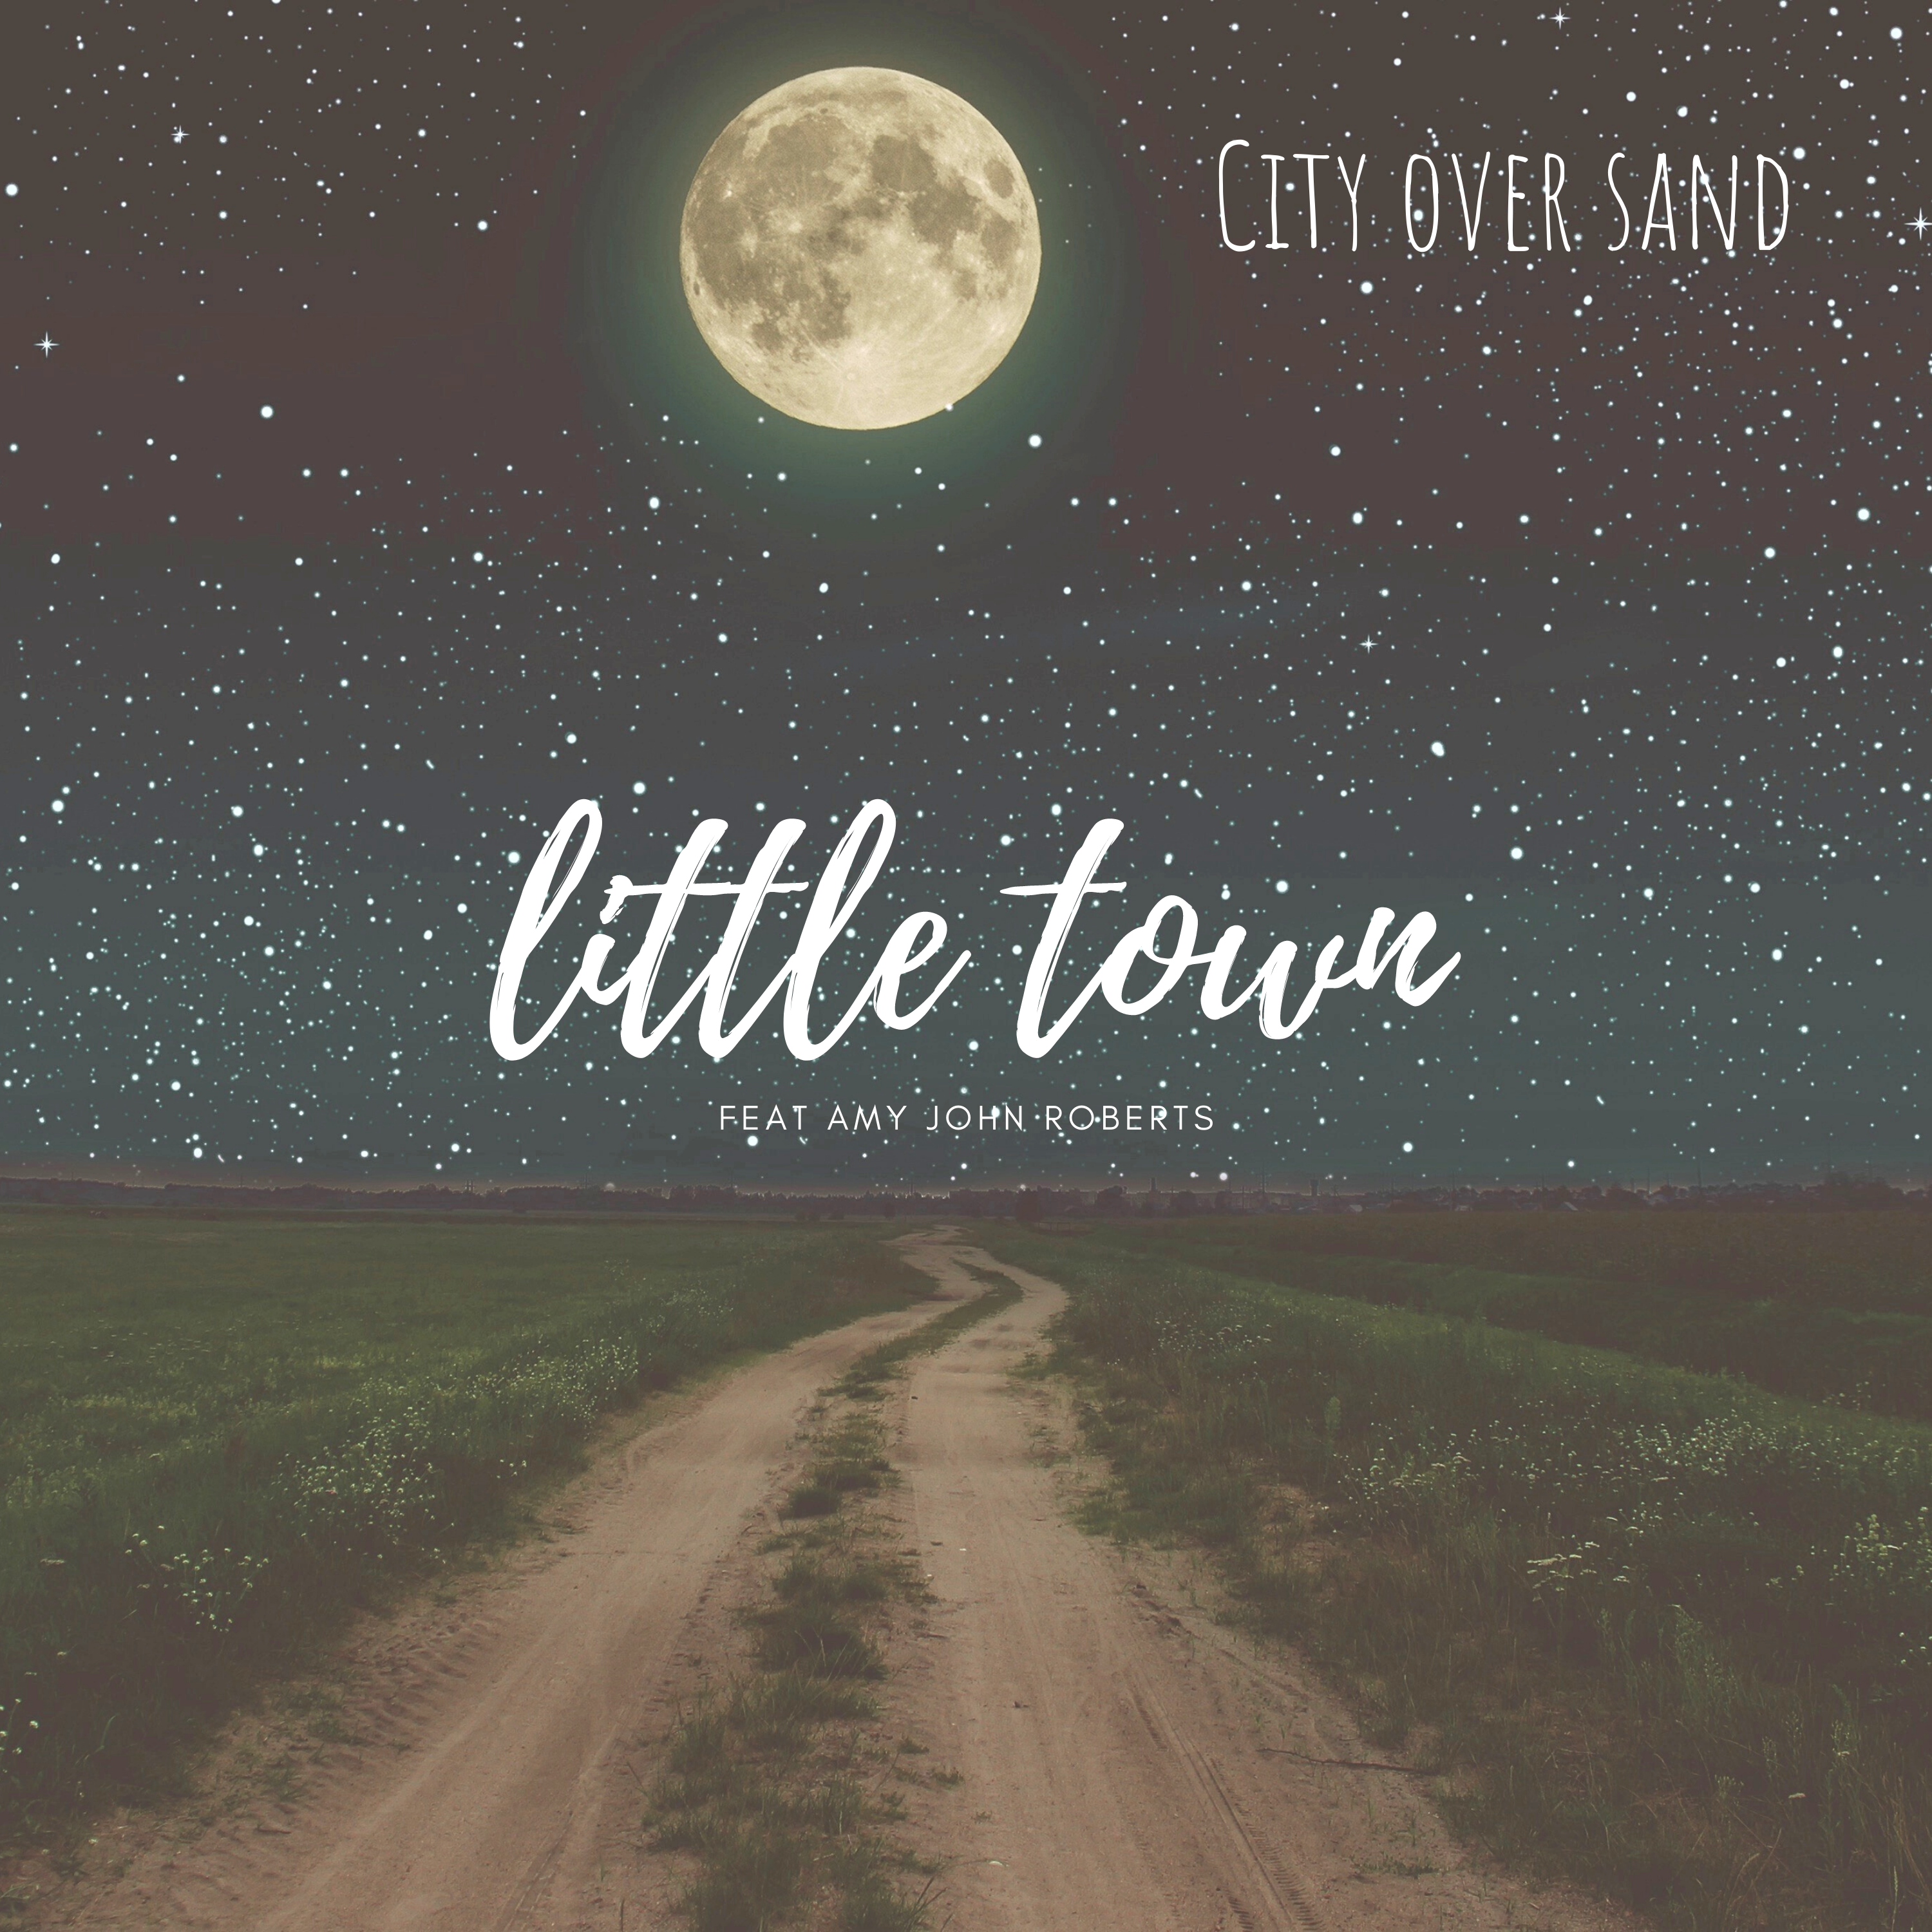 Artwork for track: Little Town by City Over Sand